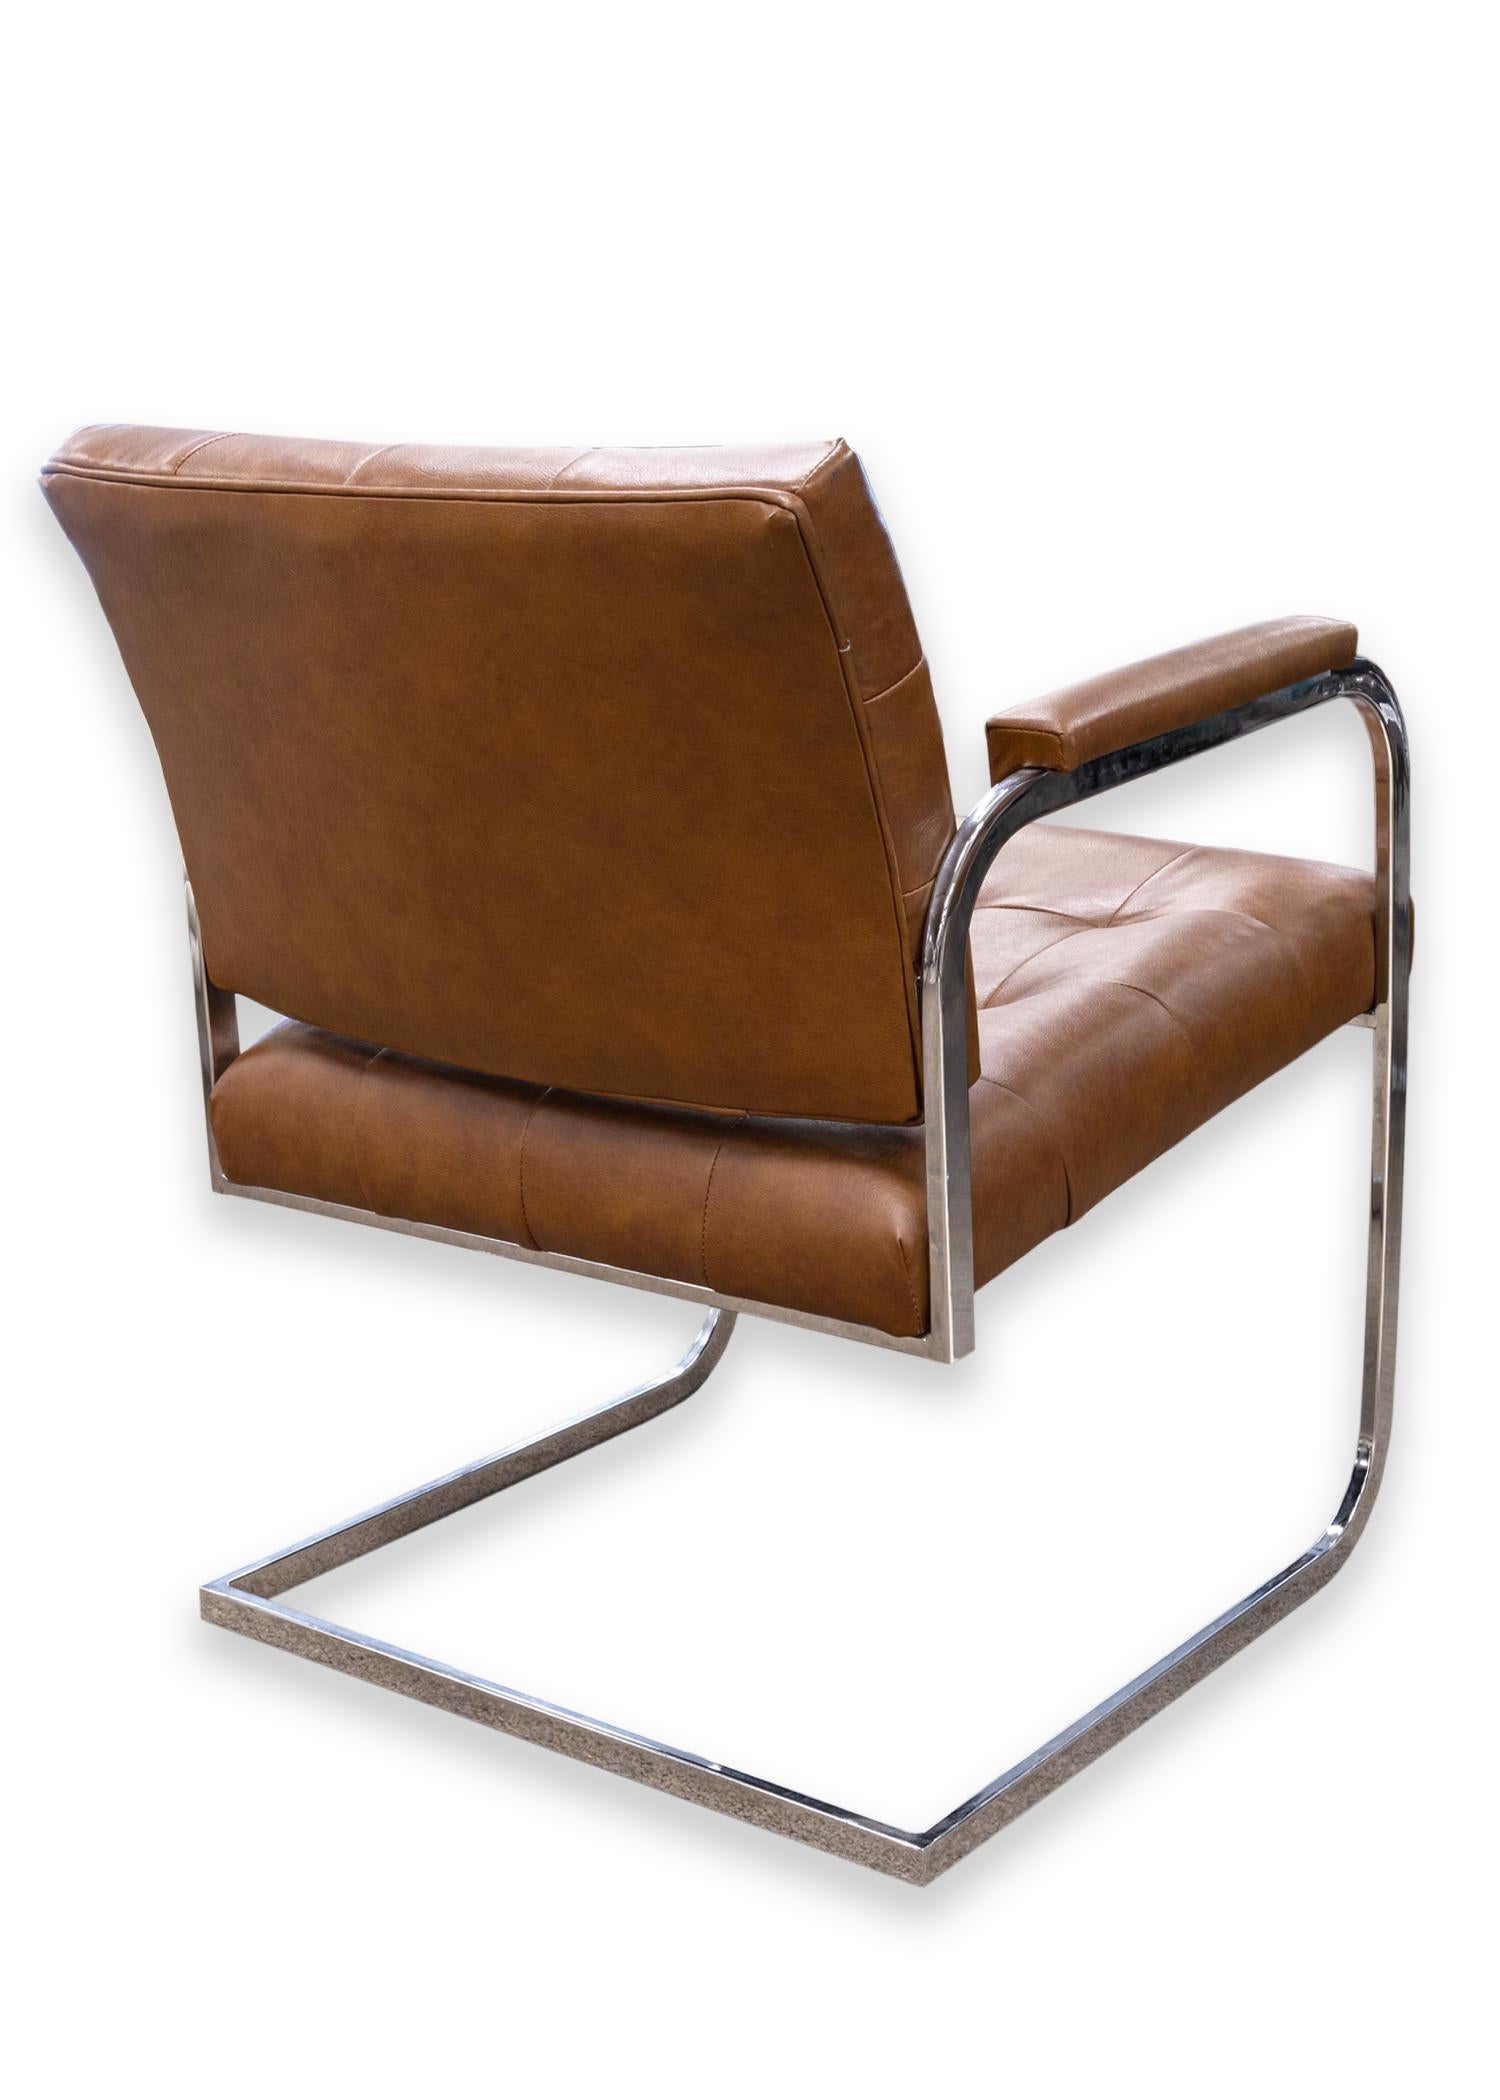 20th Century Set of 4 Patrician Mid Century Modern Brown Leather Chrome Cantilever Chairs